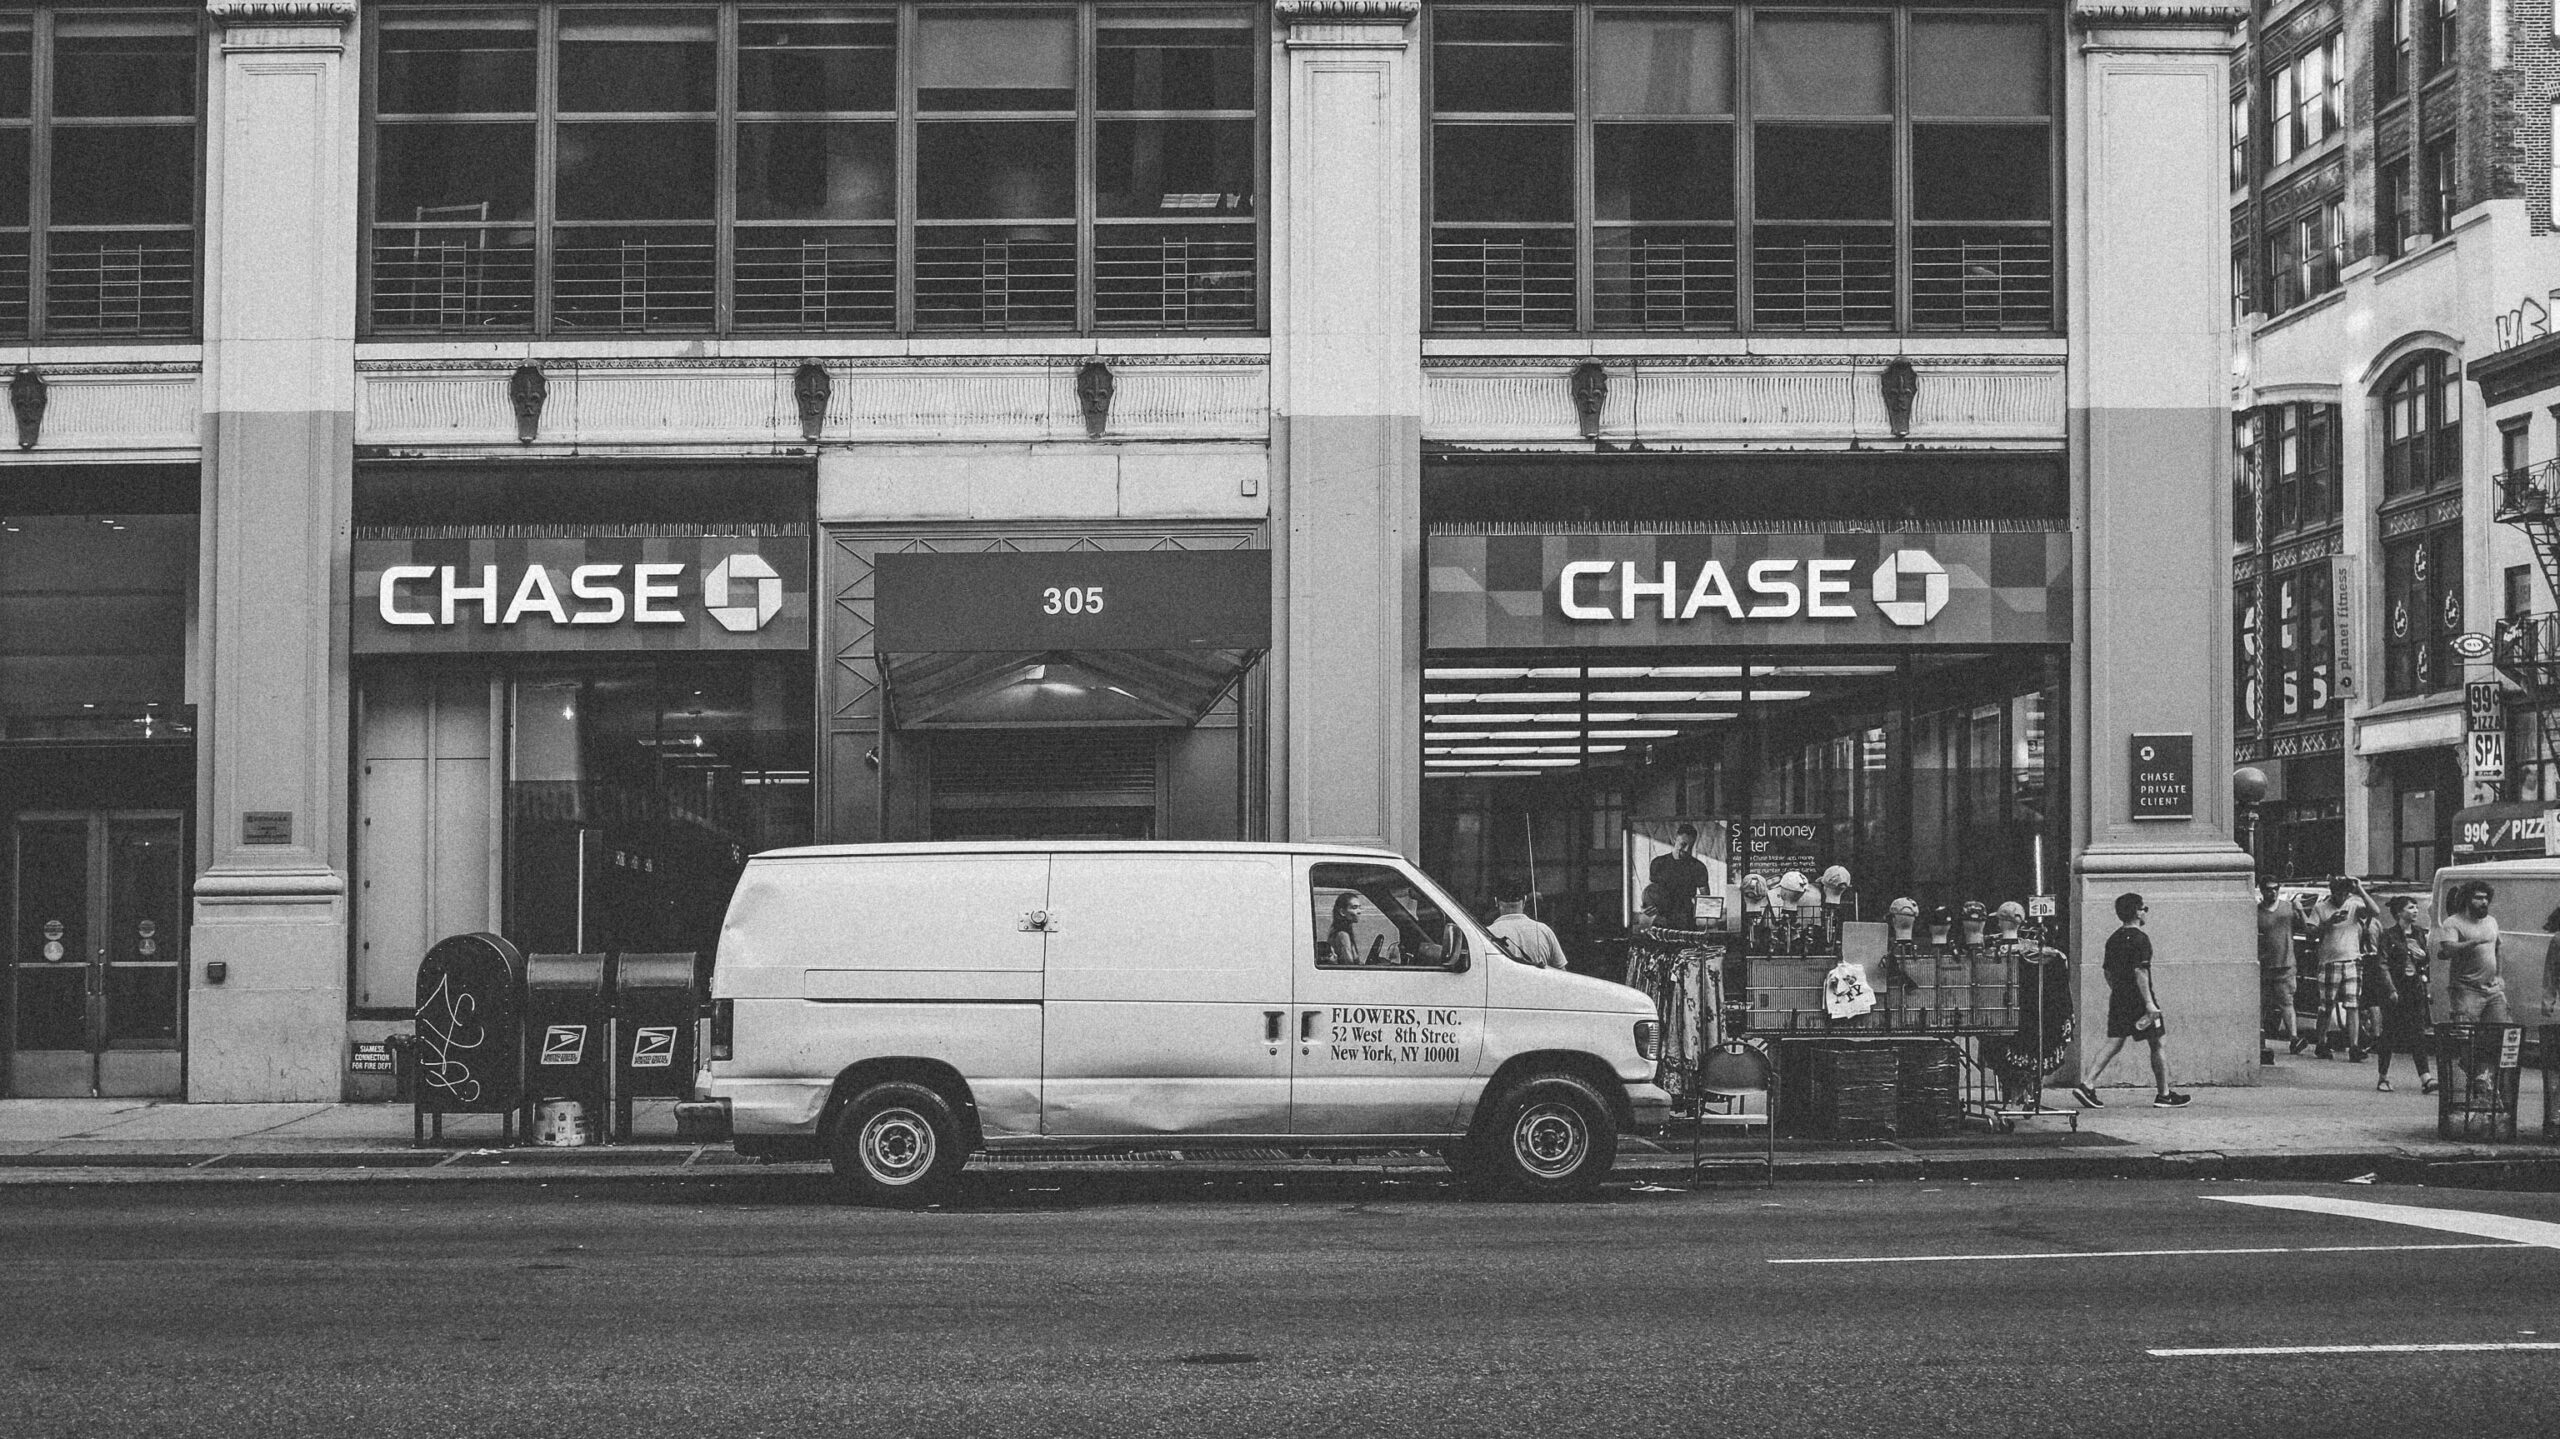 What time does Chase Bank open and close?